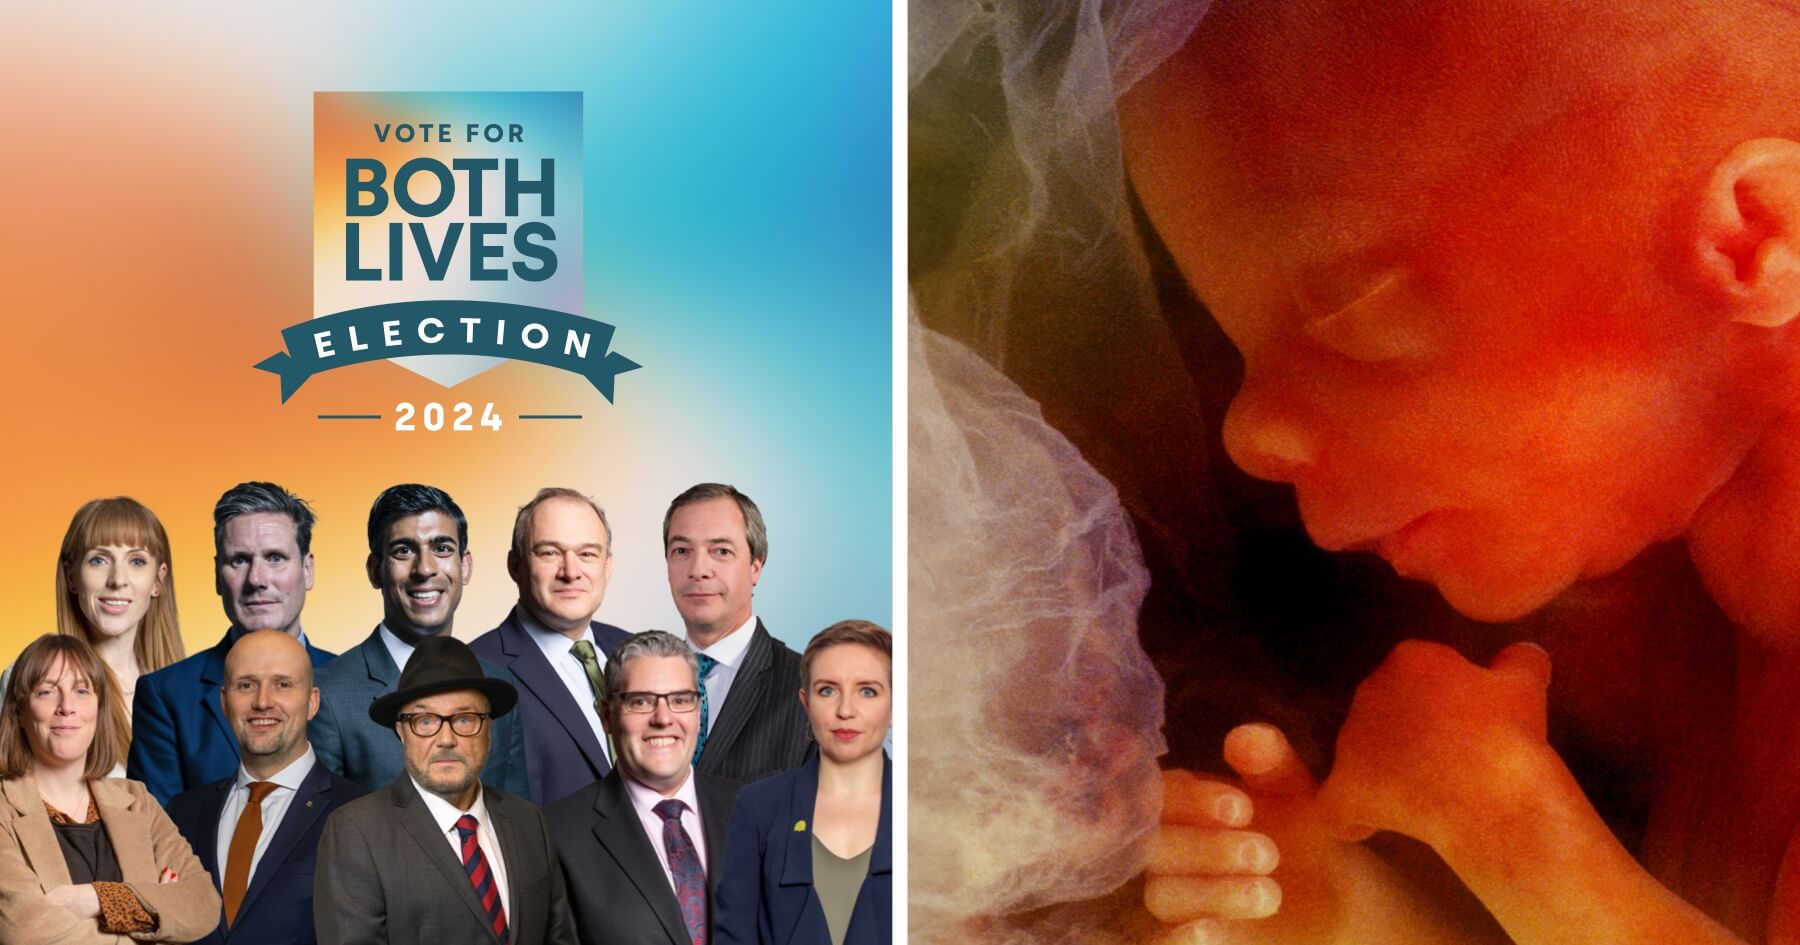 Press release - Major pro-life election campaign launched as 70% of candidates standing down have pro-abortion stance